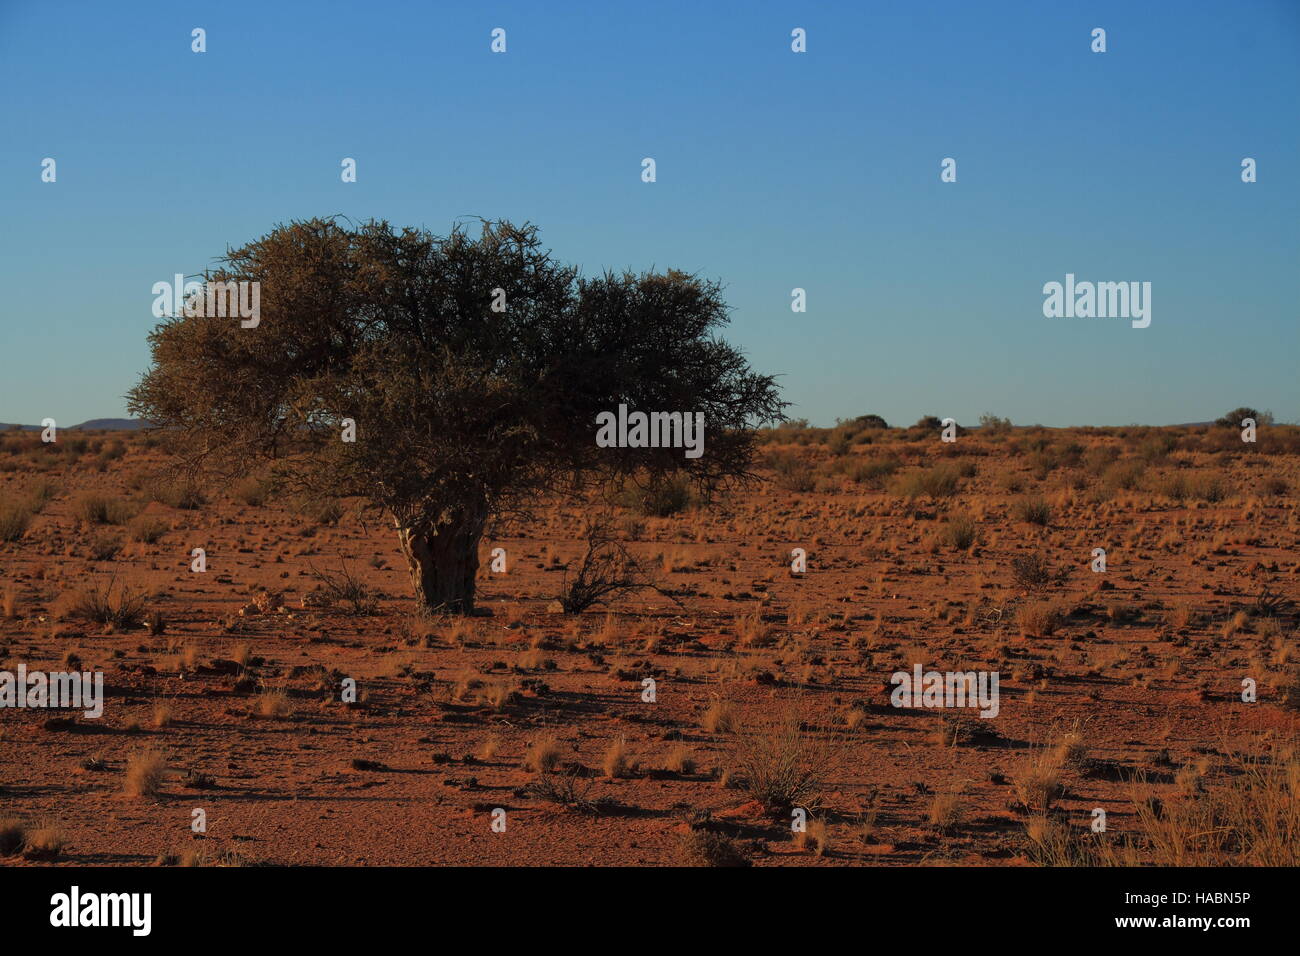 Nama Karoo landscape Namaqualand Northern Cape Province South Africa image with copy space in landscape format Stock Photo